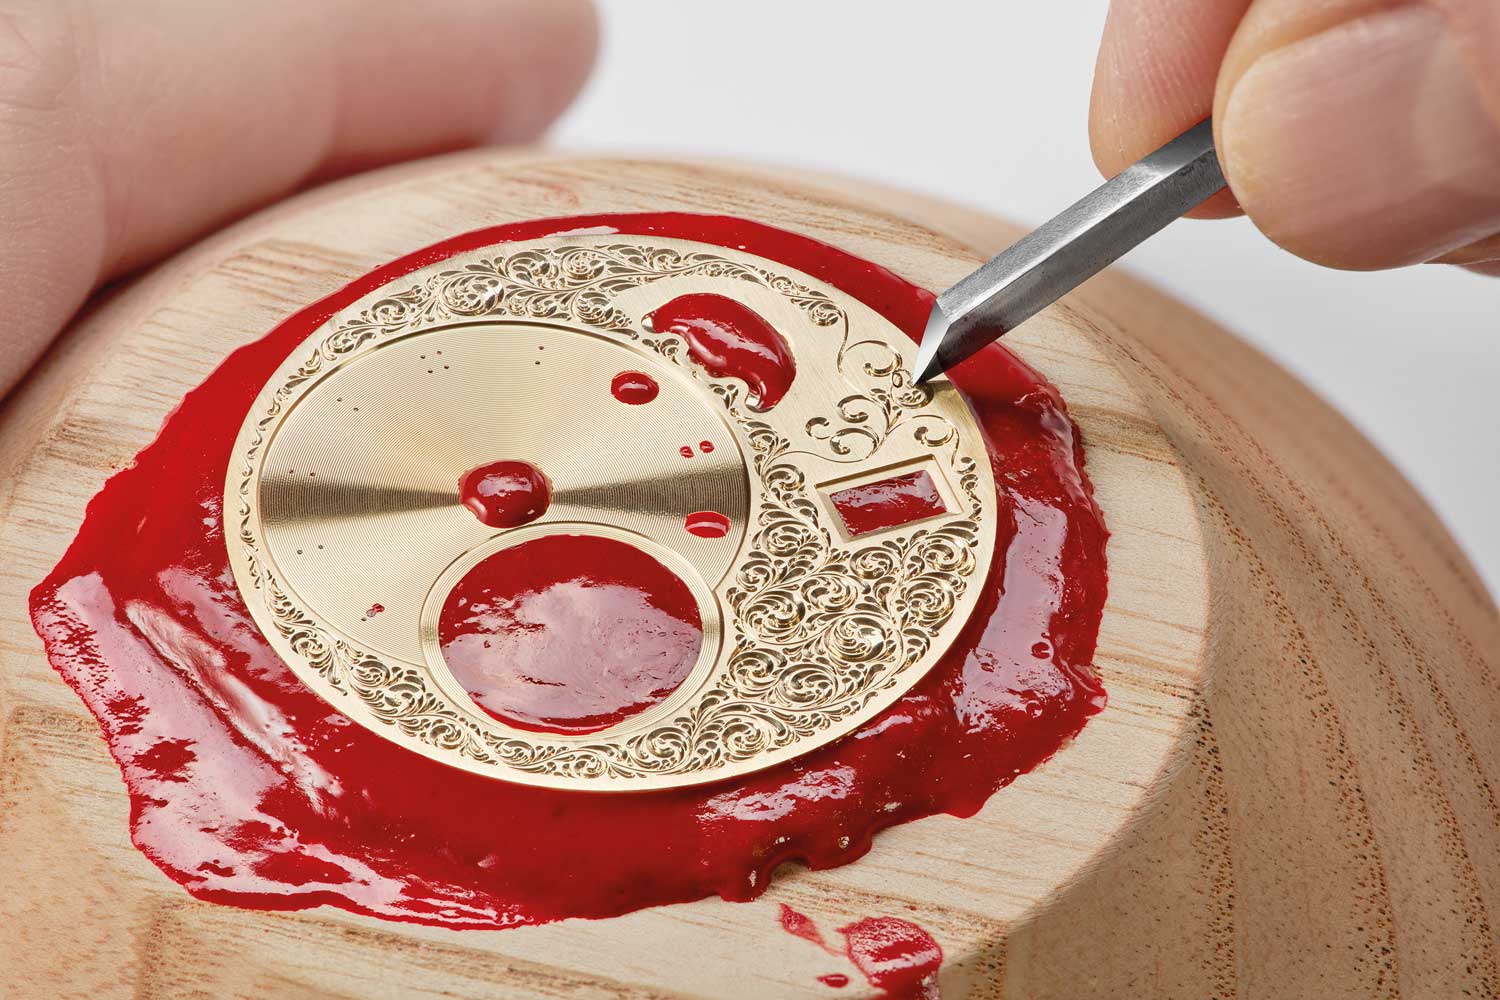 The spectacular engraved dial, a complex process taking 27 steps, and a full day to complete.